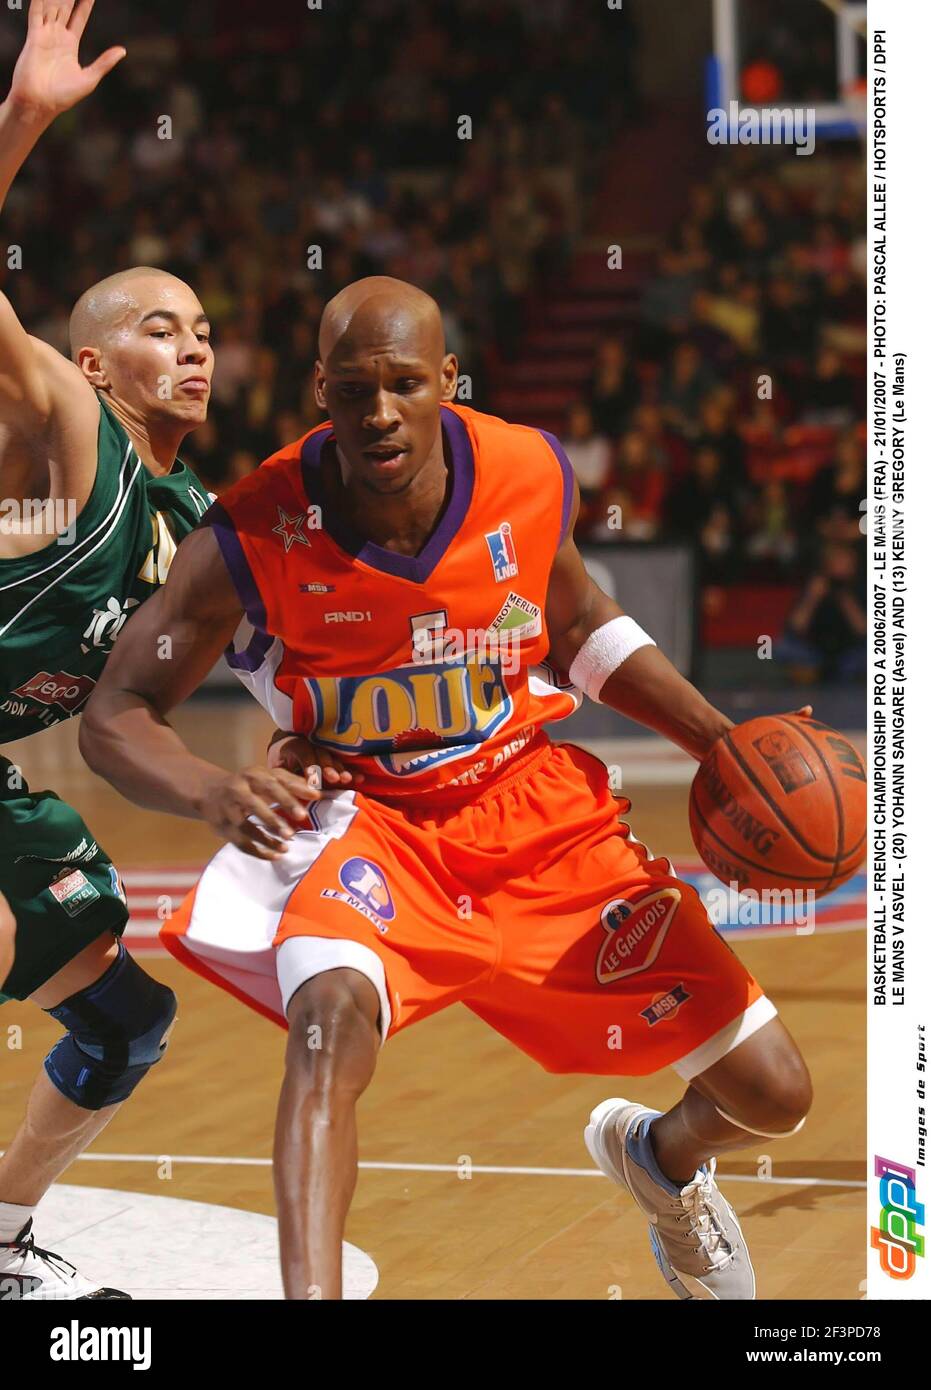 BASKETBALL - FRENCH CHAMPIONSHIP PRO A 2006/2007 - LE MANS (FRA) -  21/01/2007 - PHOTO: PASCAL ALLEE / HOTSPORTS / DPPI LE MANS V ASVEL - (20)  YOHANN SANGARE (Asvel) AND (13) KENNY GREGORY (Le Mans Stock Photo - Alamy